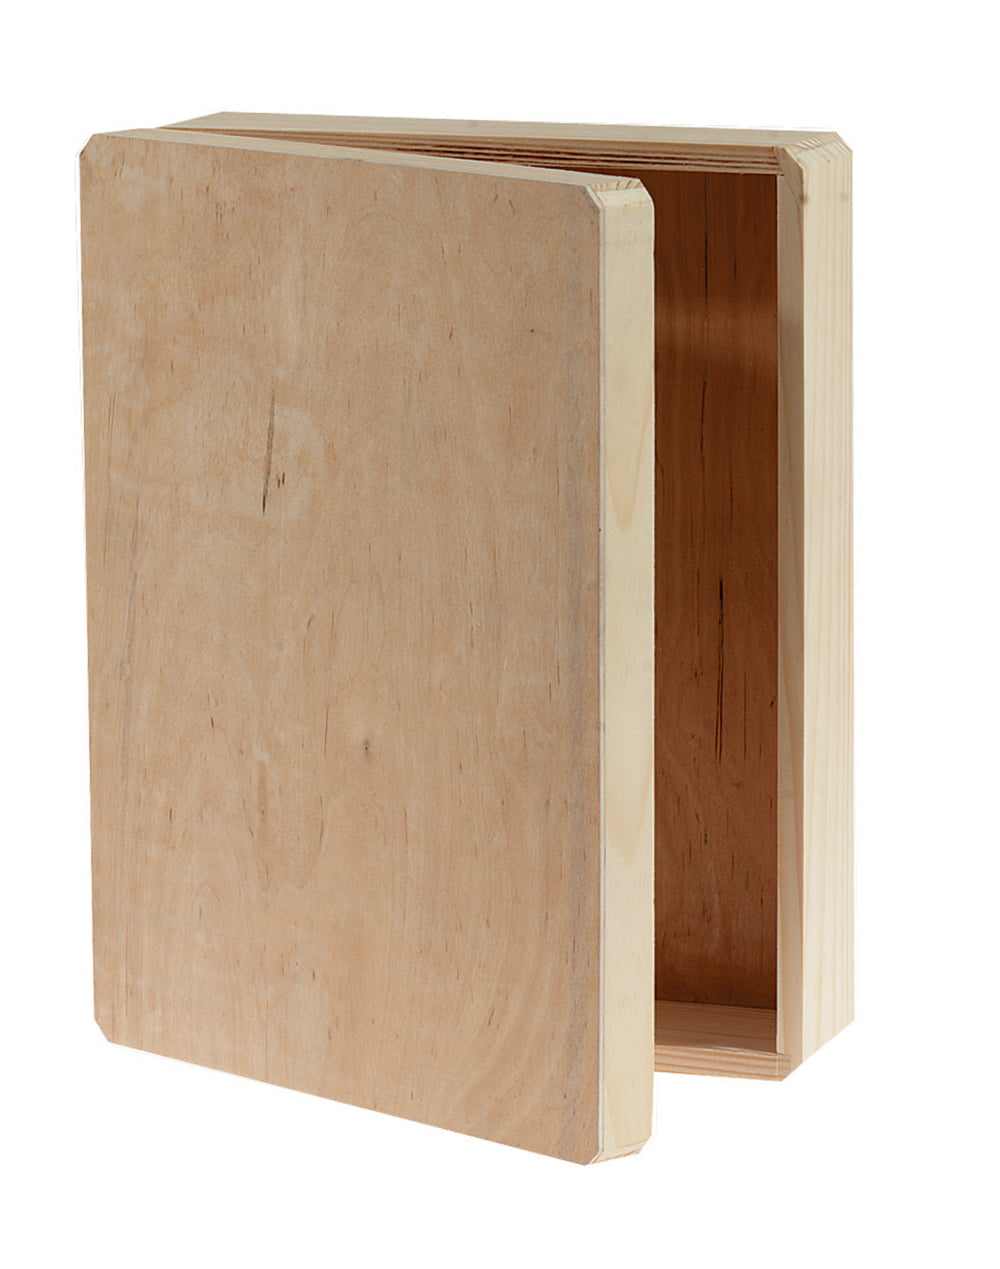 Darice Hinged Unfinished Wood Memory Box, 12 x 9.125 x 3.25 Inches ...